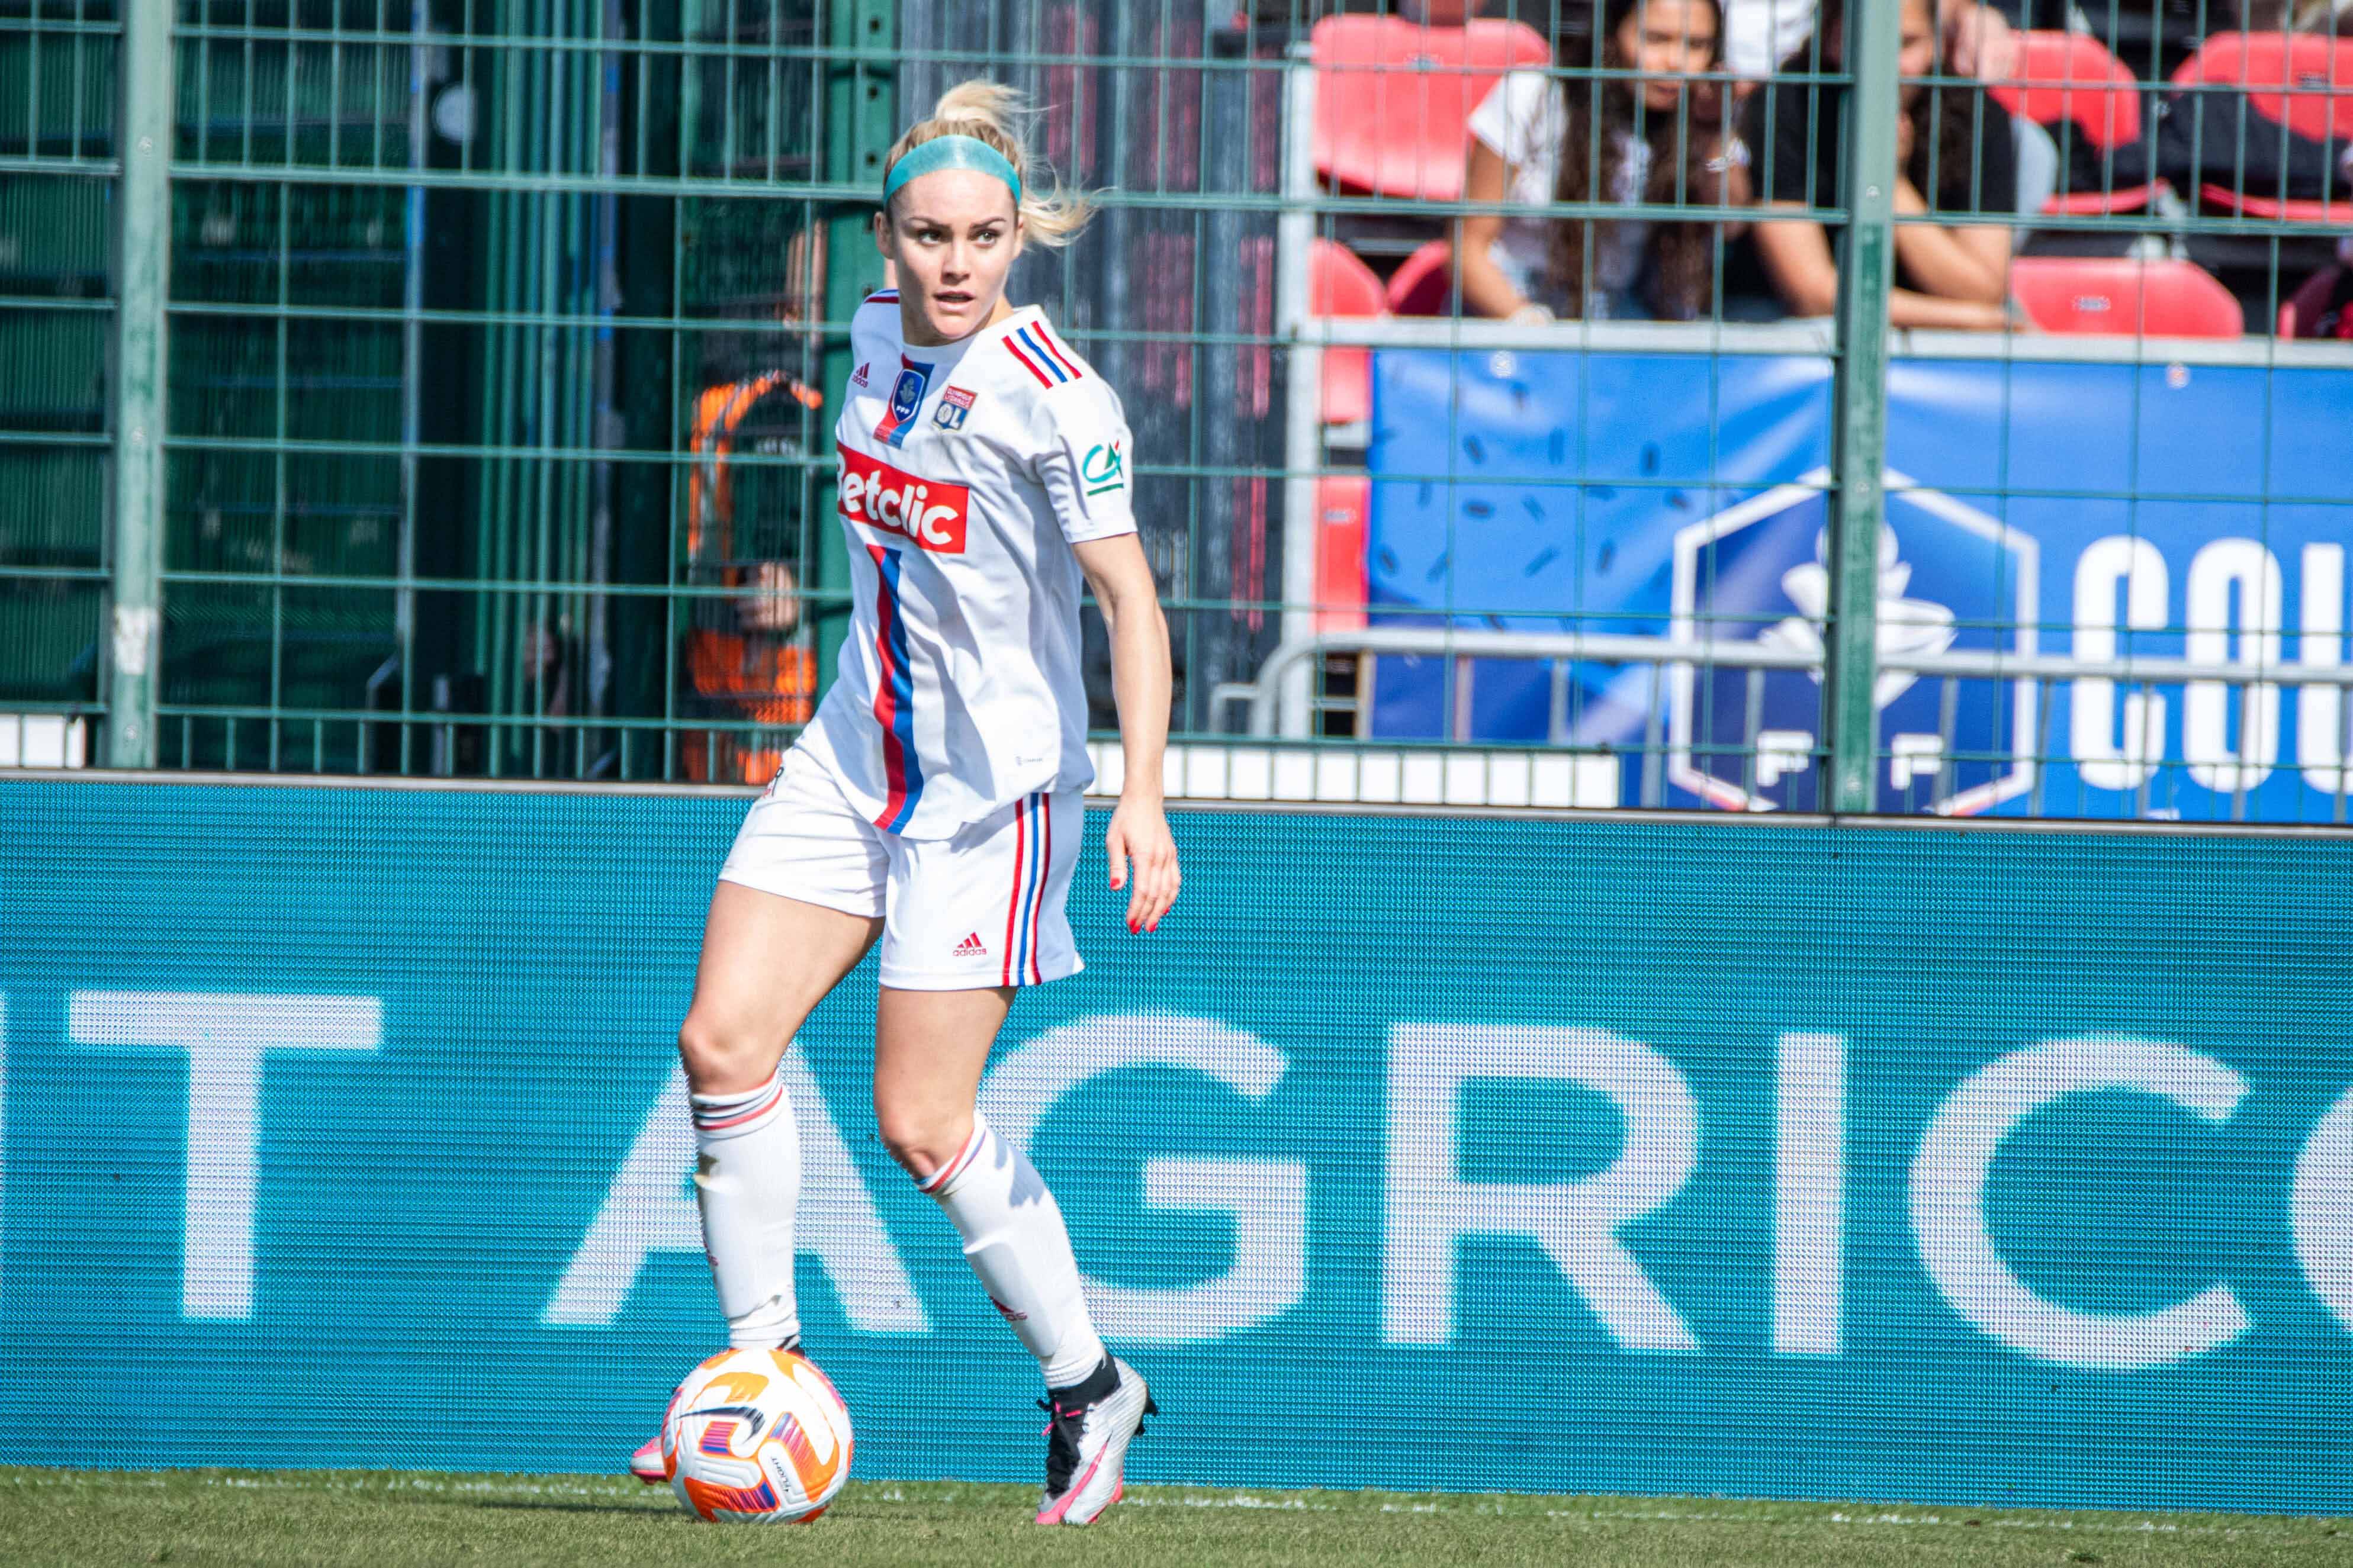 Ellie Carpenter (12) from OL in action during the coupe de france final between Olympique Lyonnais and Paris Saint Germain at the Stade de la source in Orleans, France.